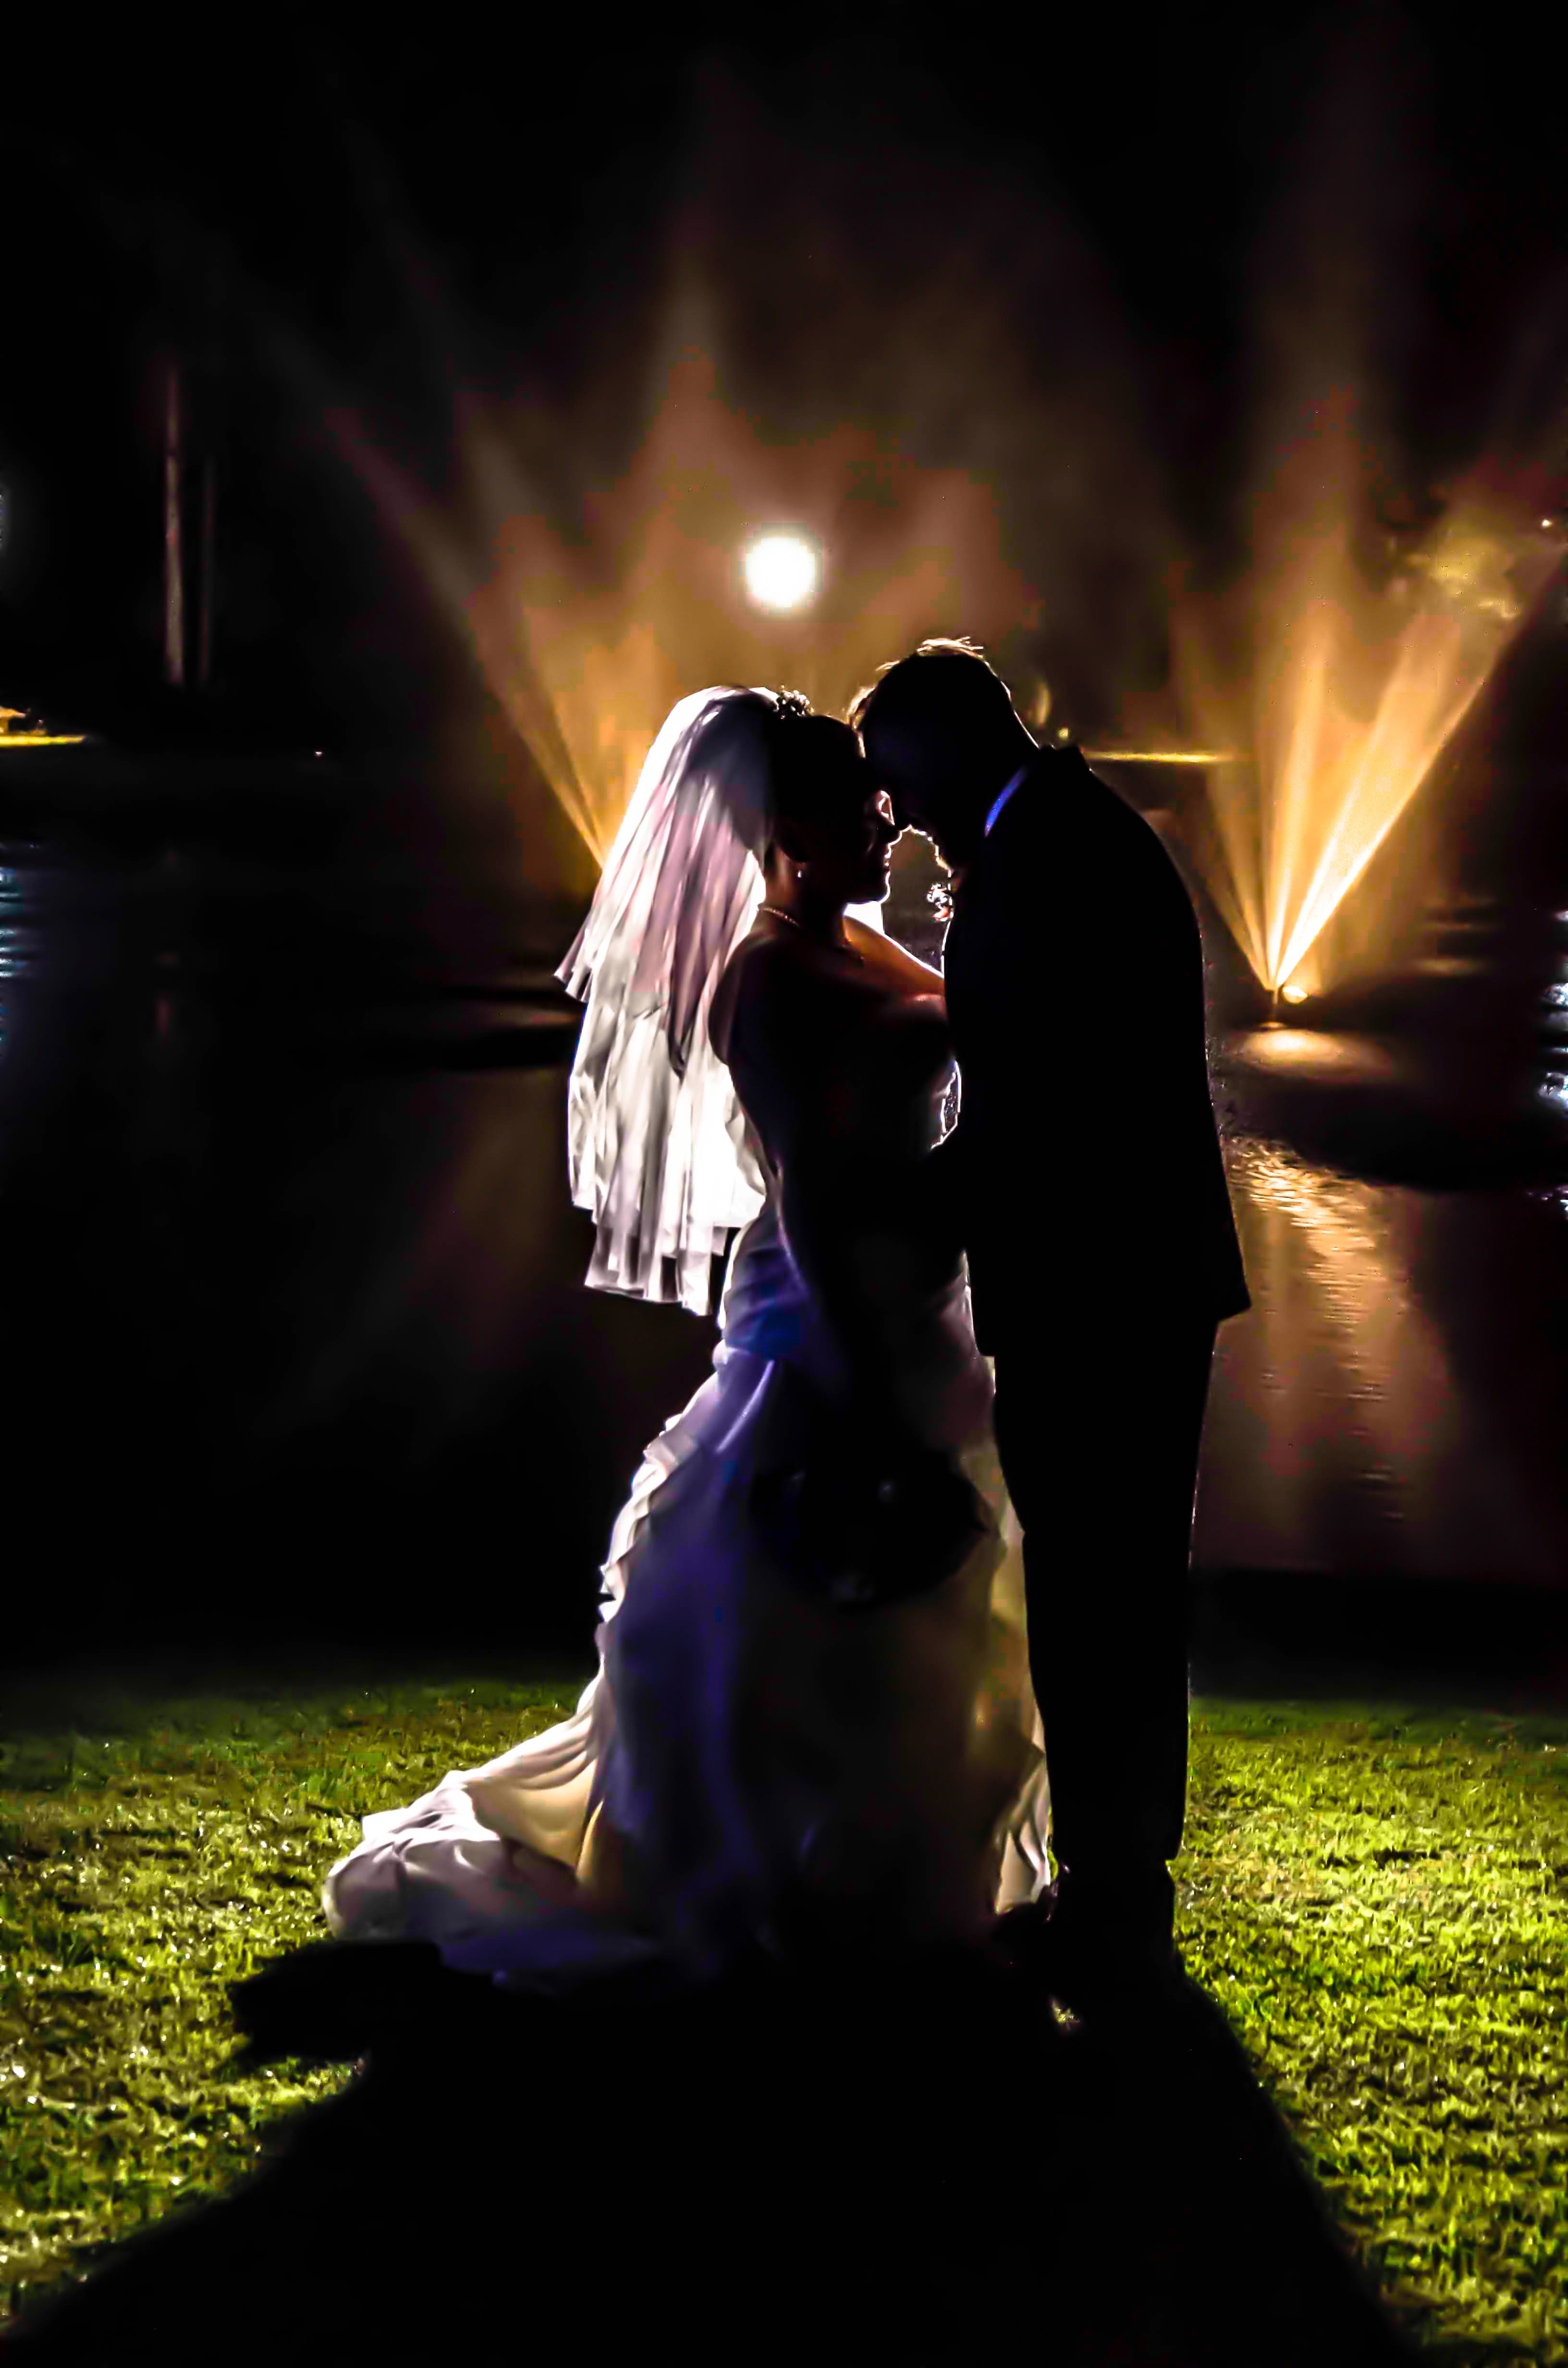 Silhouette of bride and groom on grass field during night times photo